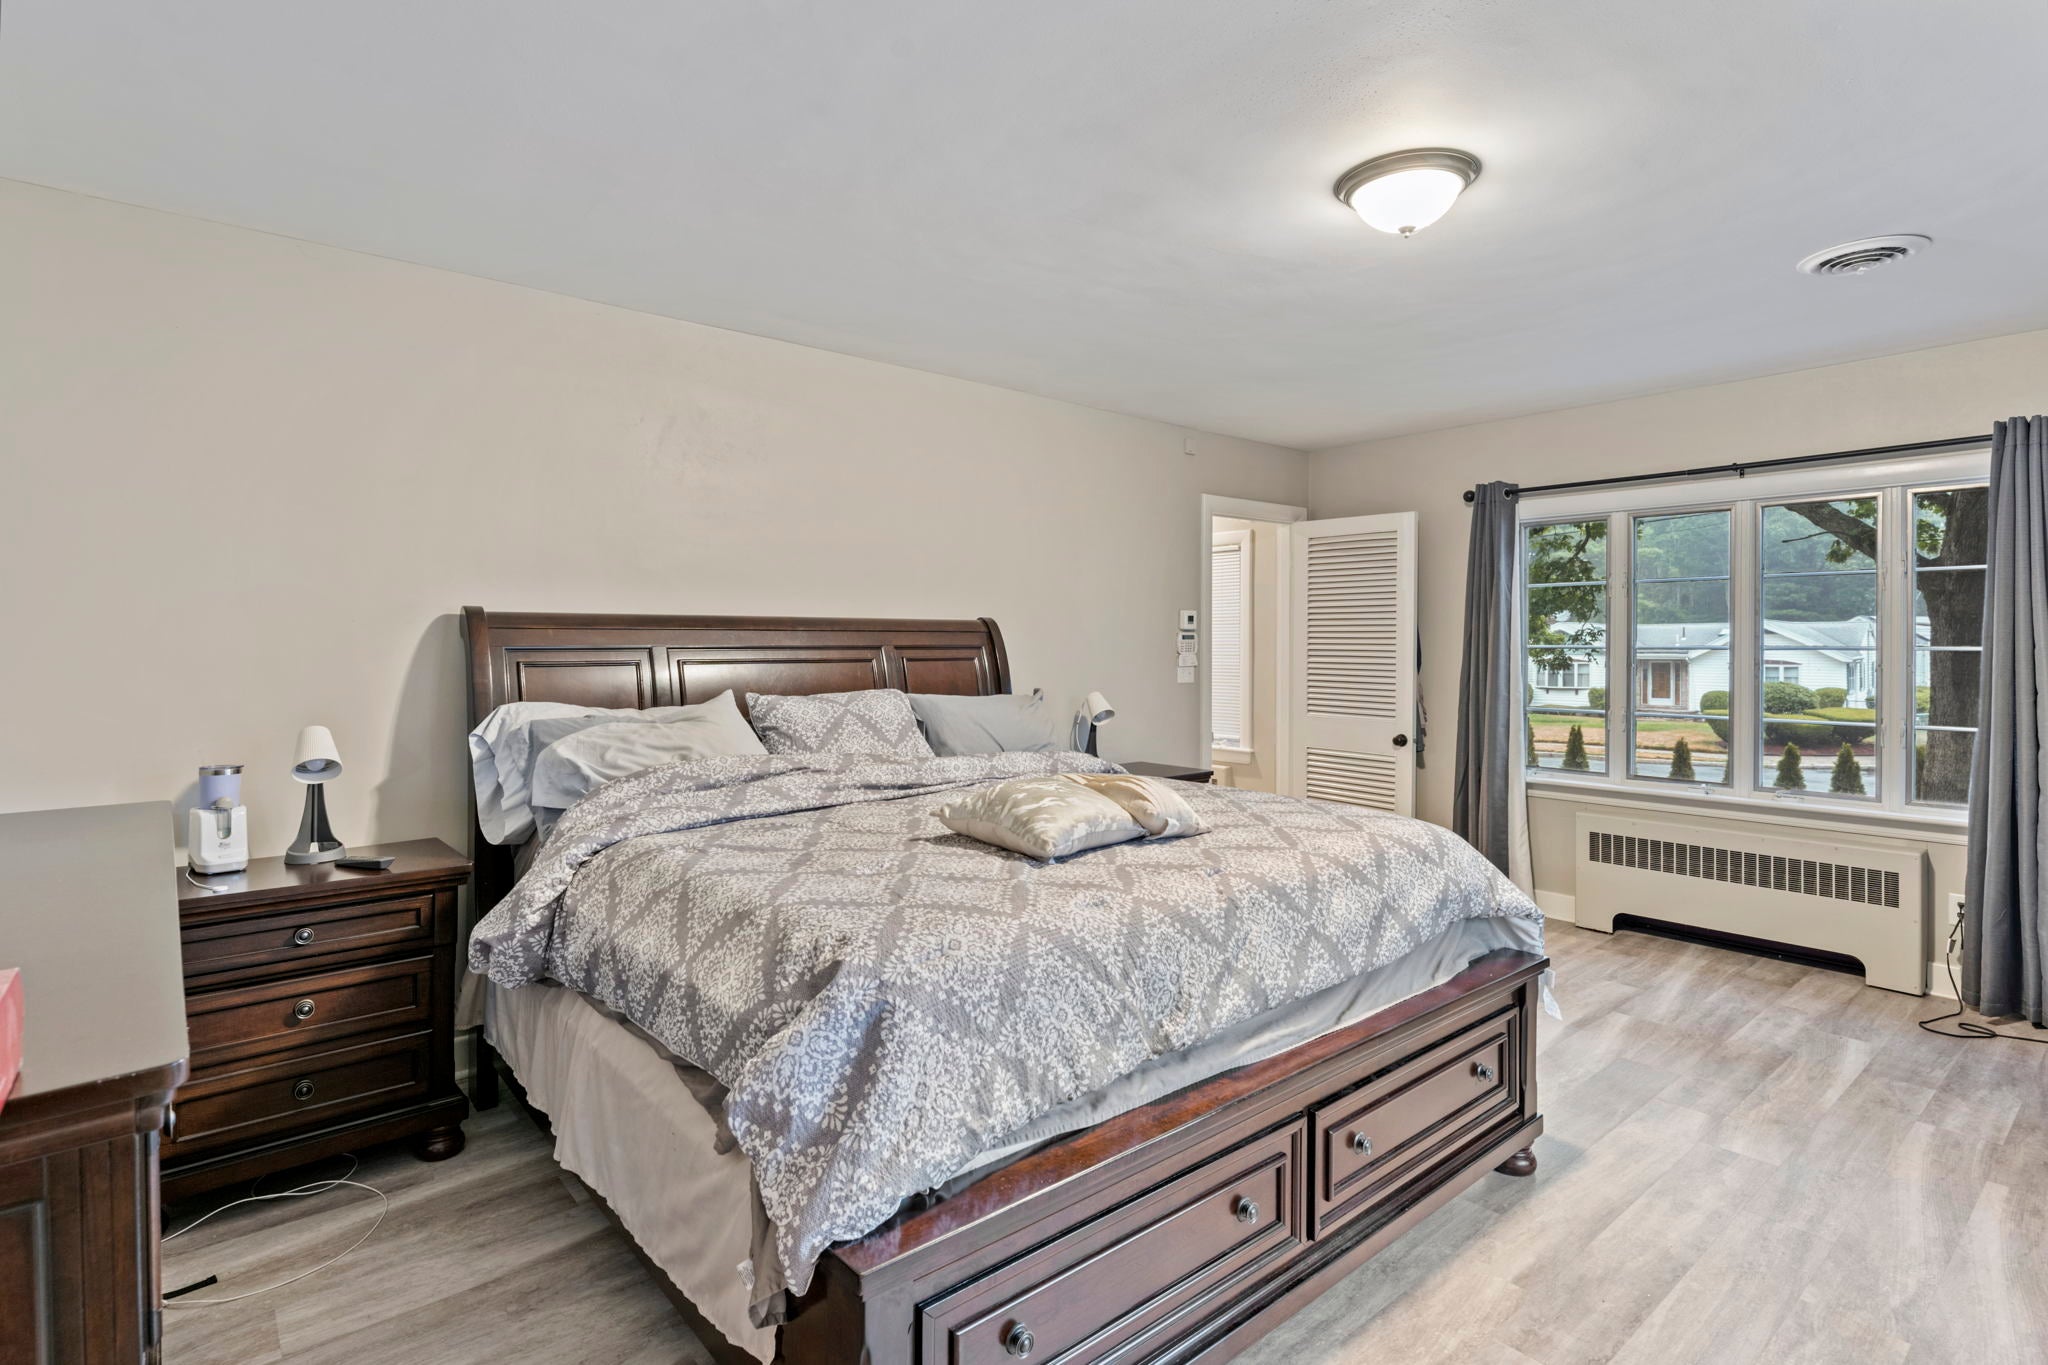 A bedroom with neutral colored walls, flooring that lookslike wood, and a grouping of four windows.